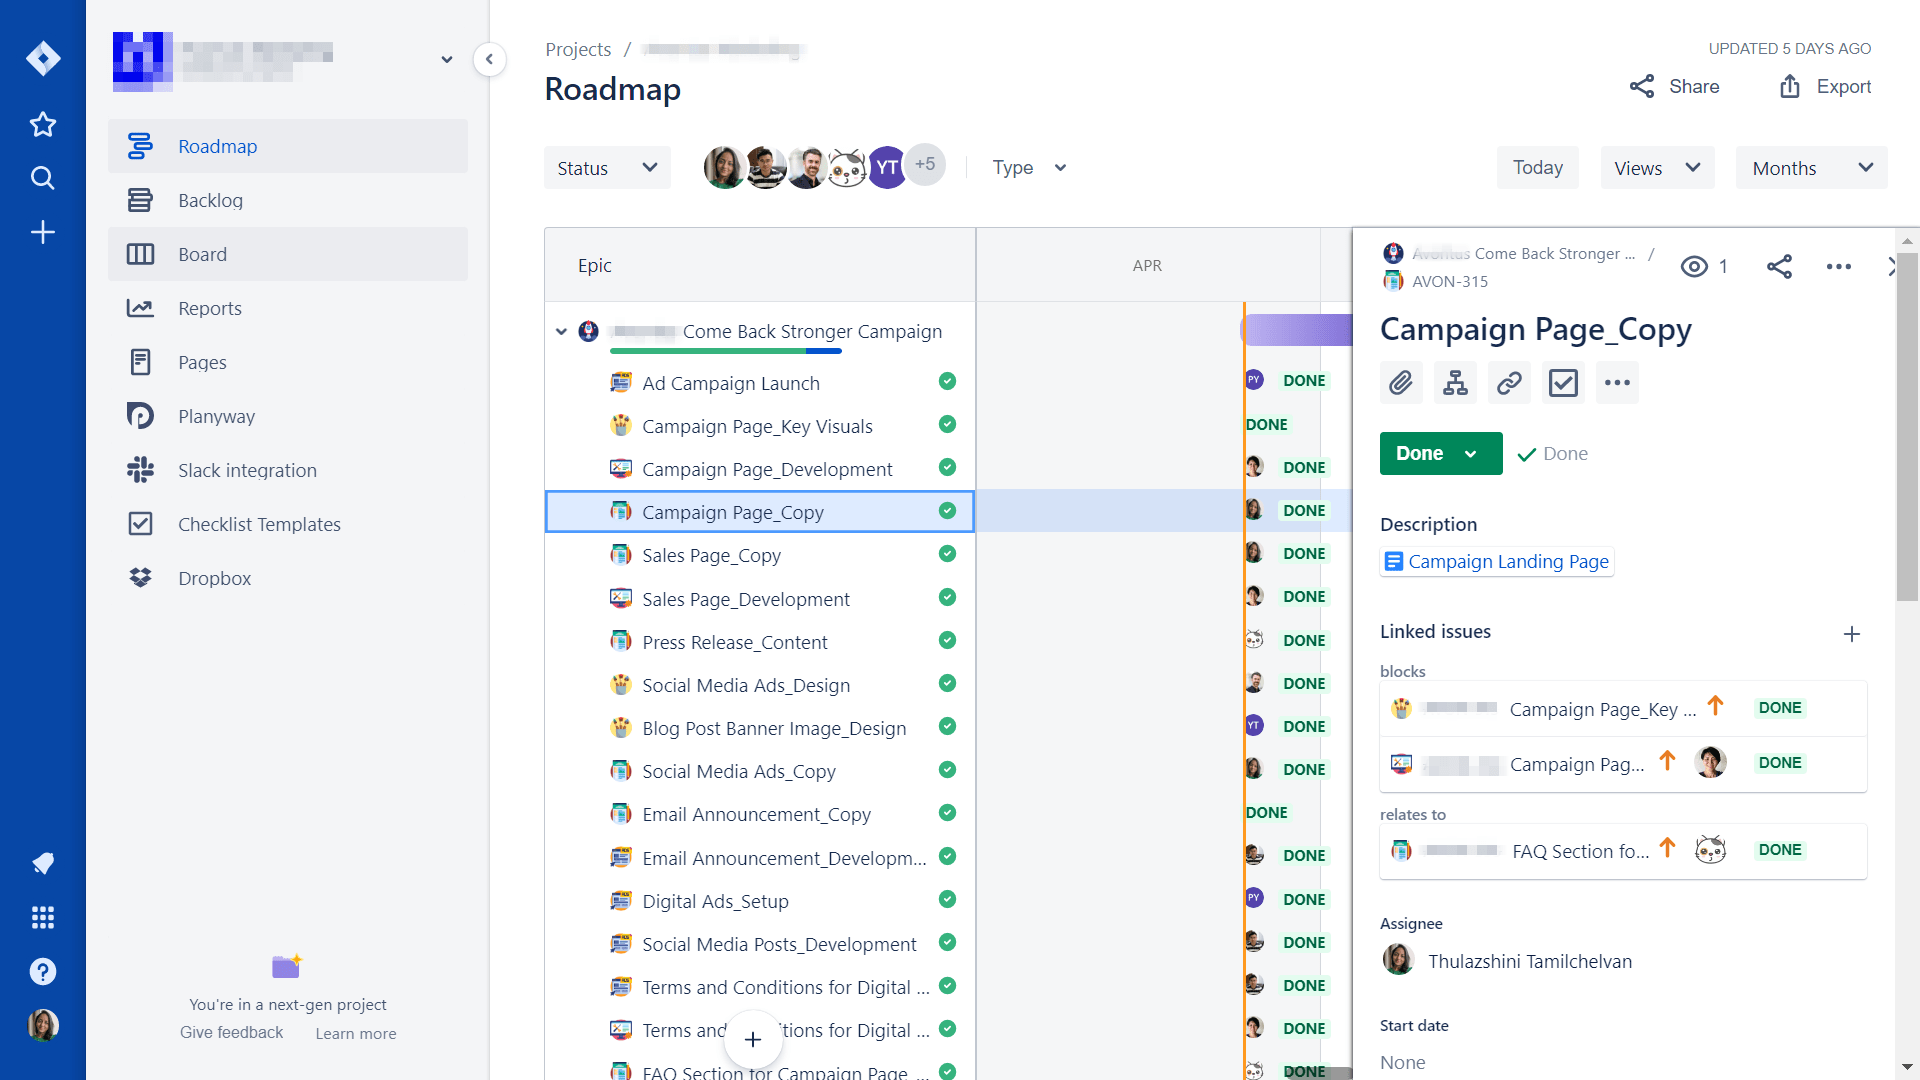 With Jira, tracking deliverables for a remote marketing campaign is easy.